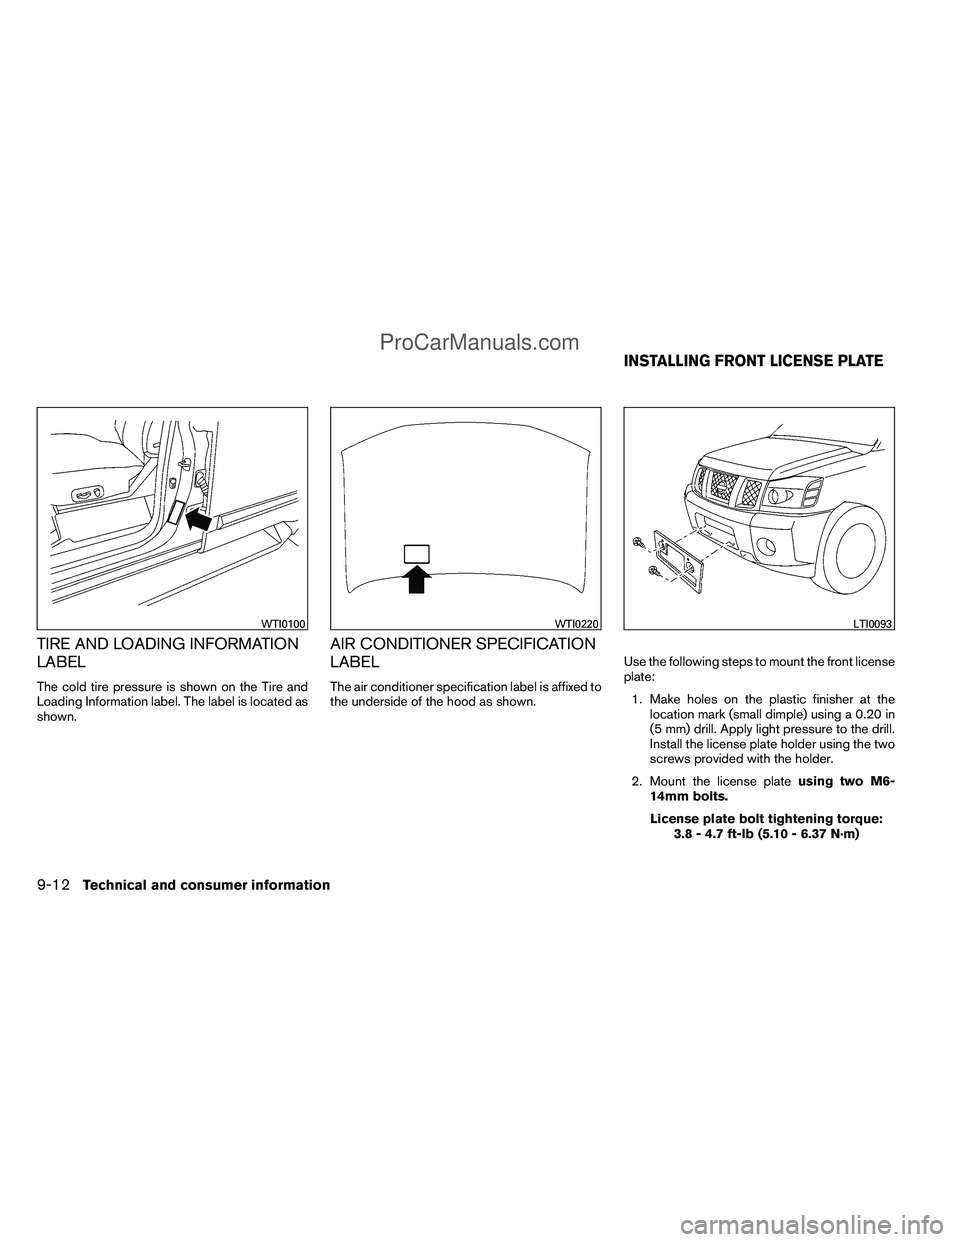 NISSAN TITAN 2012  Owners Manual TIRE AND LOADING INFORMATION
LABEL
The cold tire pressure is shown on the Tire and
Loading Information label. The label is located as
shown.
AIR CONDITIONER SPECIFICATION
LABEL
The air conditioner spe